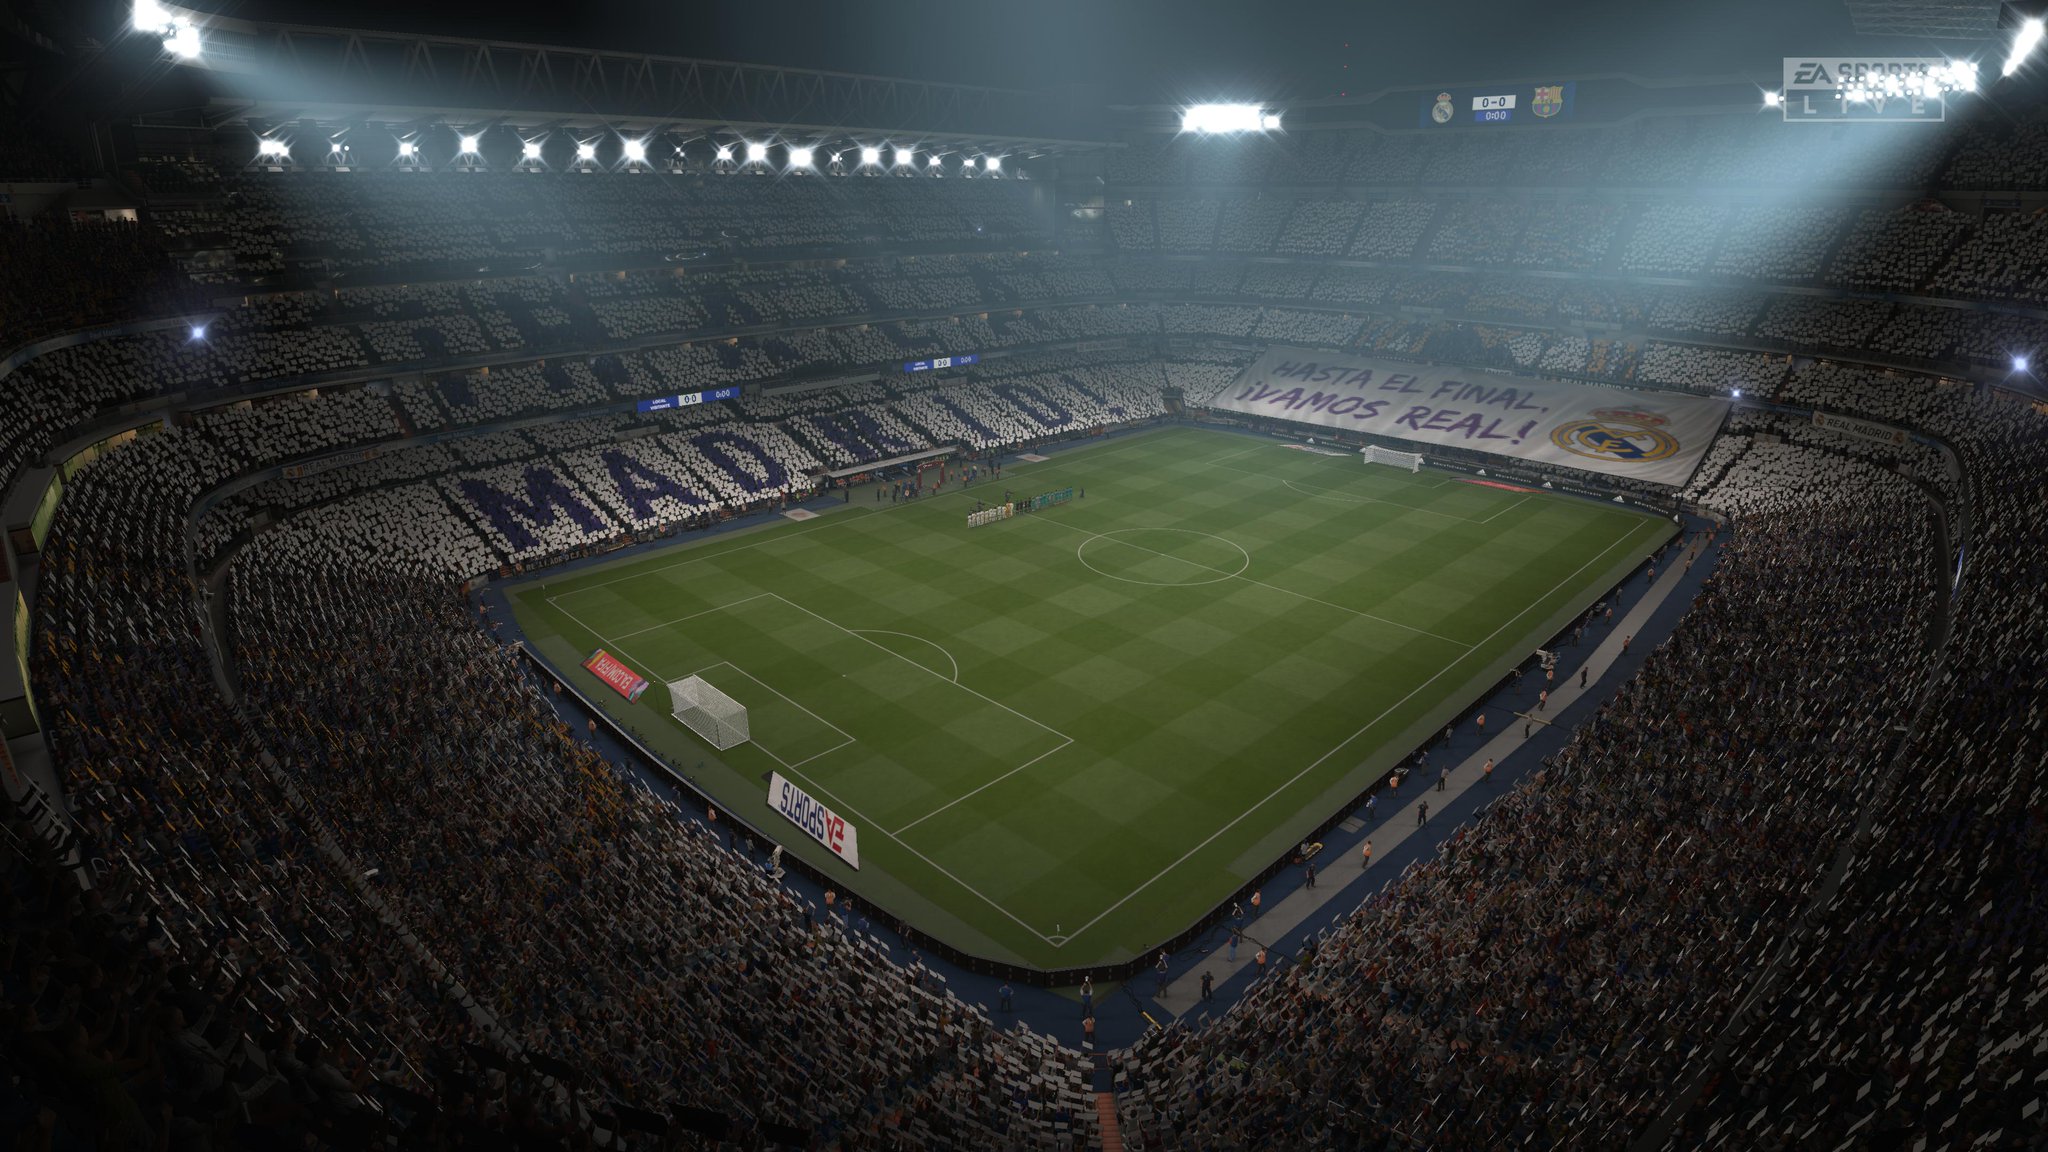 Fifa 20 Patch 1.21 Available For Pc, Playstation 4 & Xbox One - Patch Notes  Here - Operation Sports